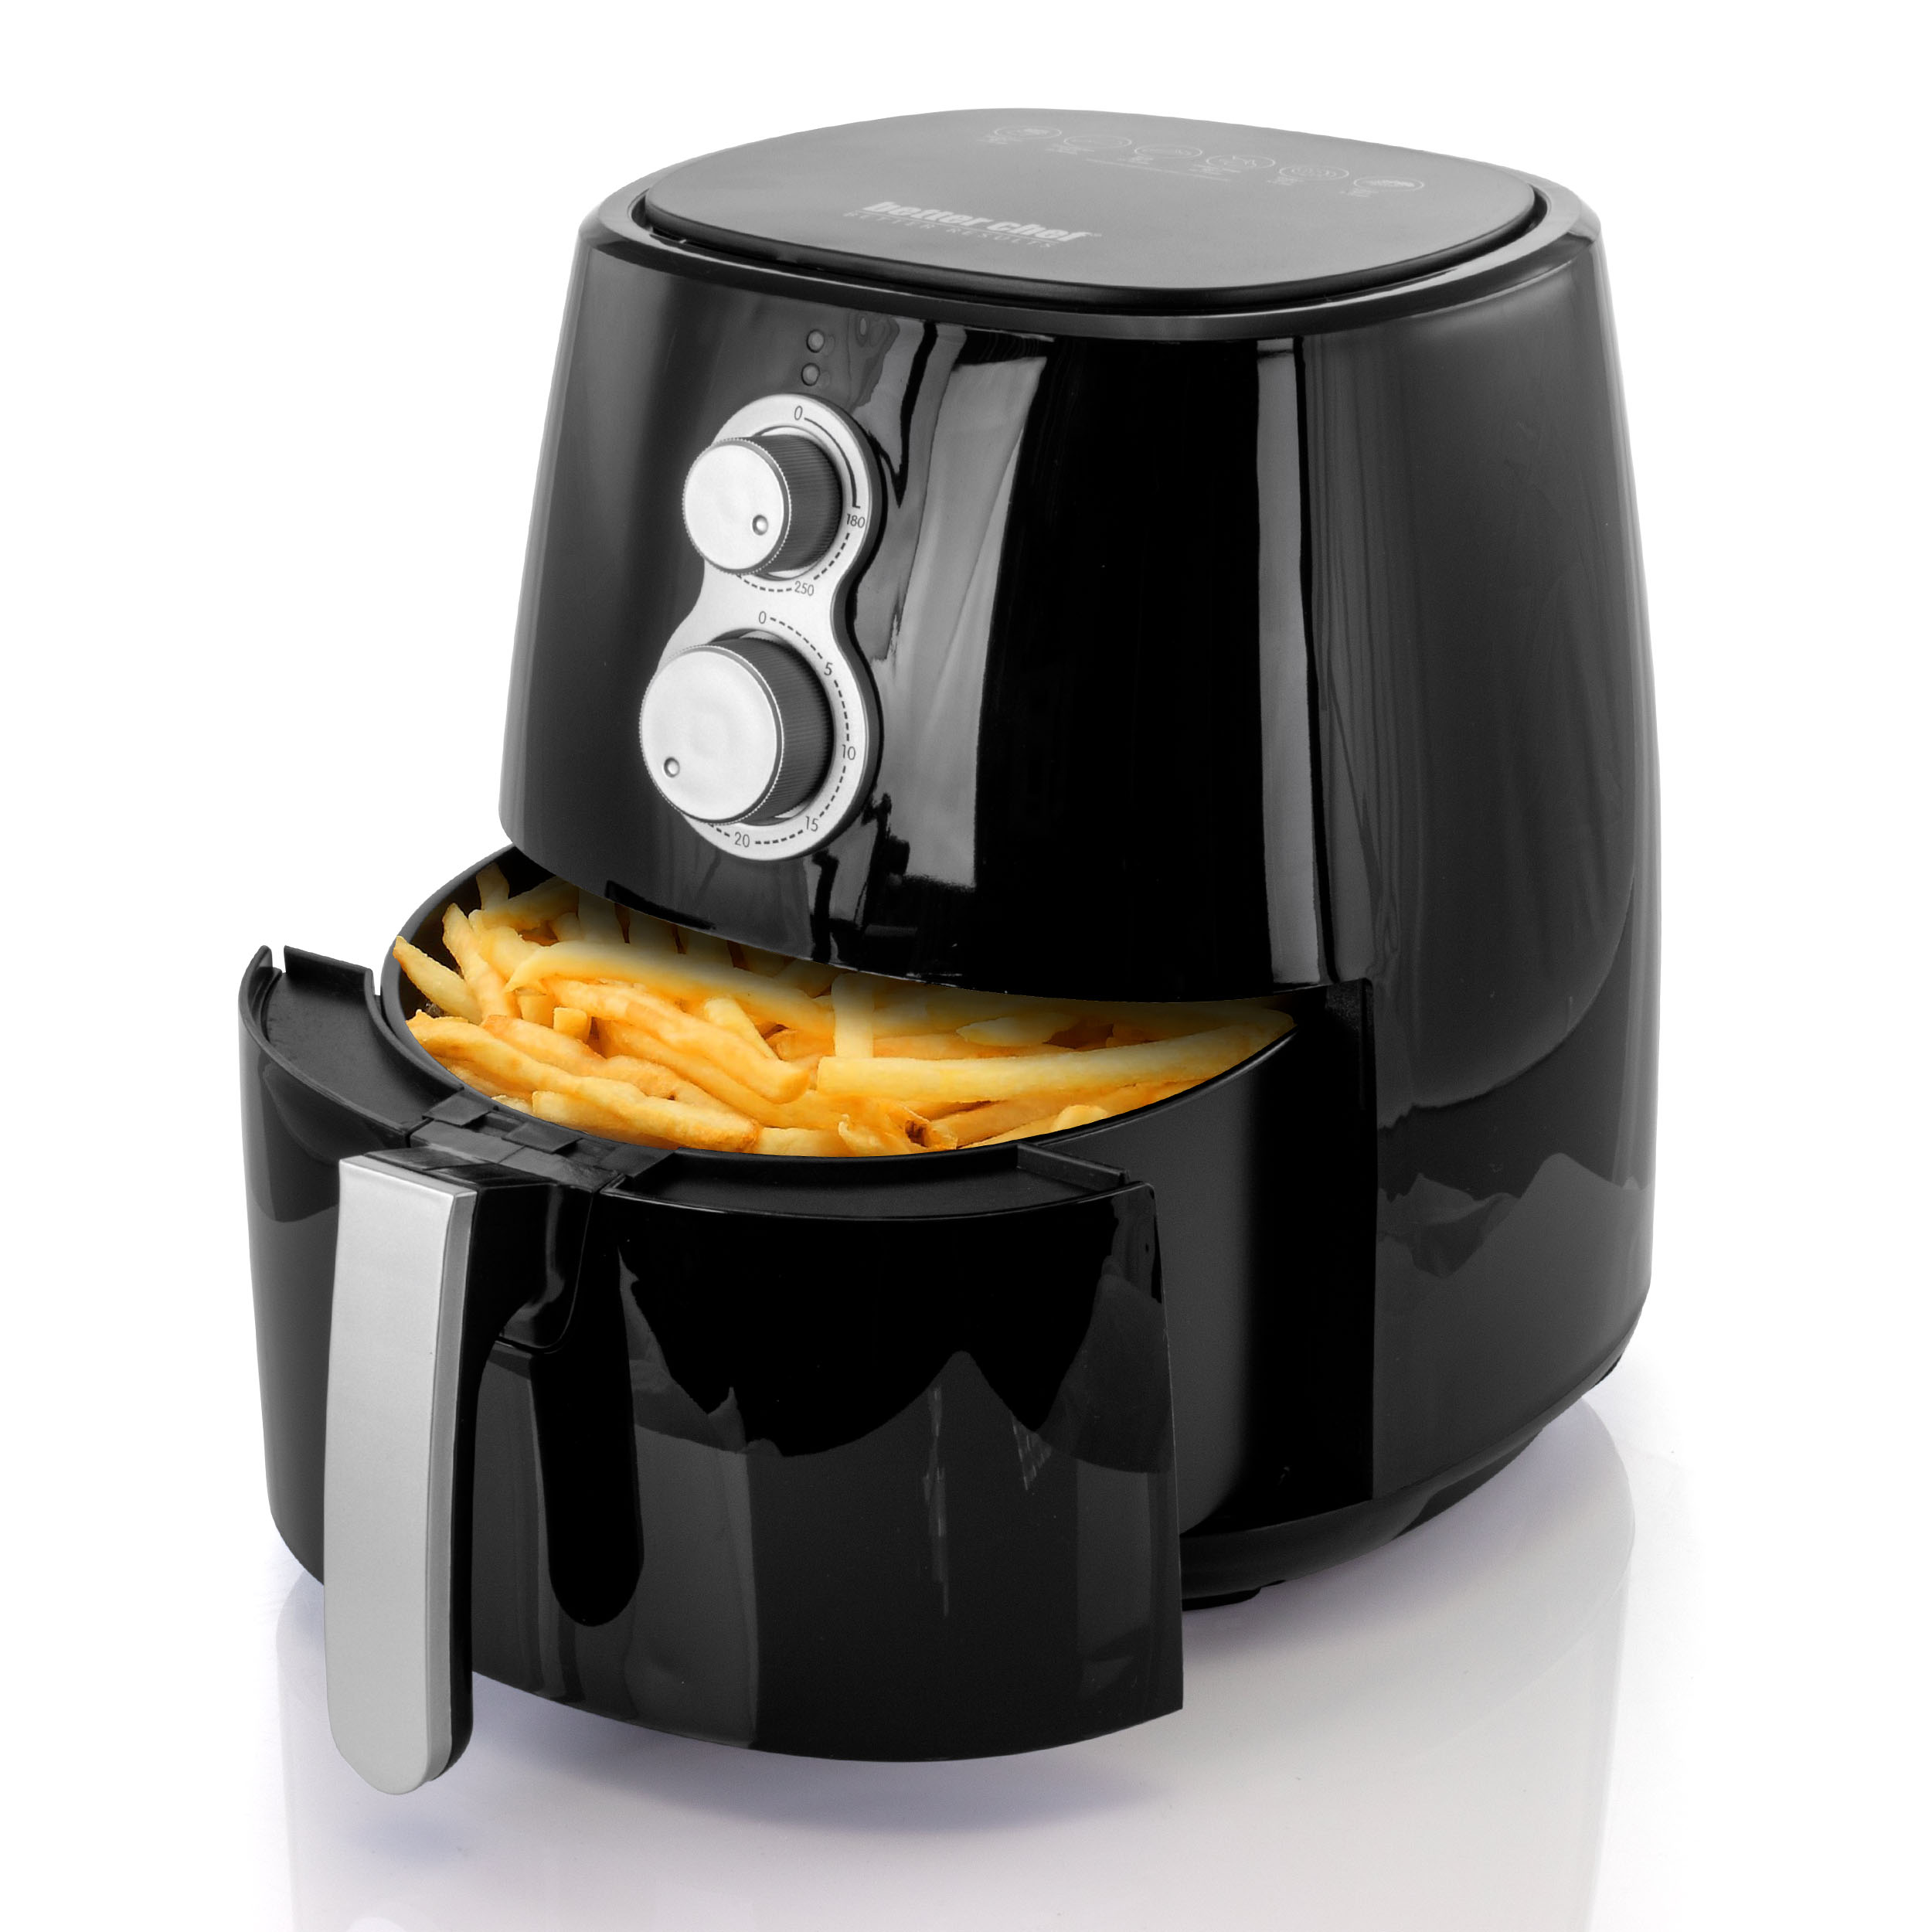 Better Chef 4 Liter Air Fryer In Black - image 1 of 2